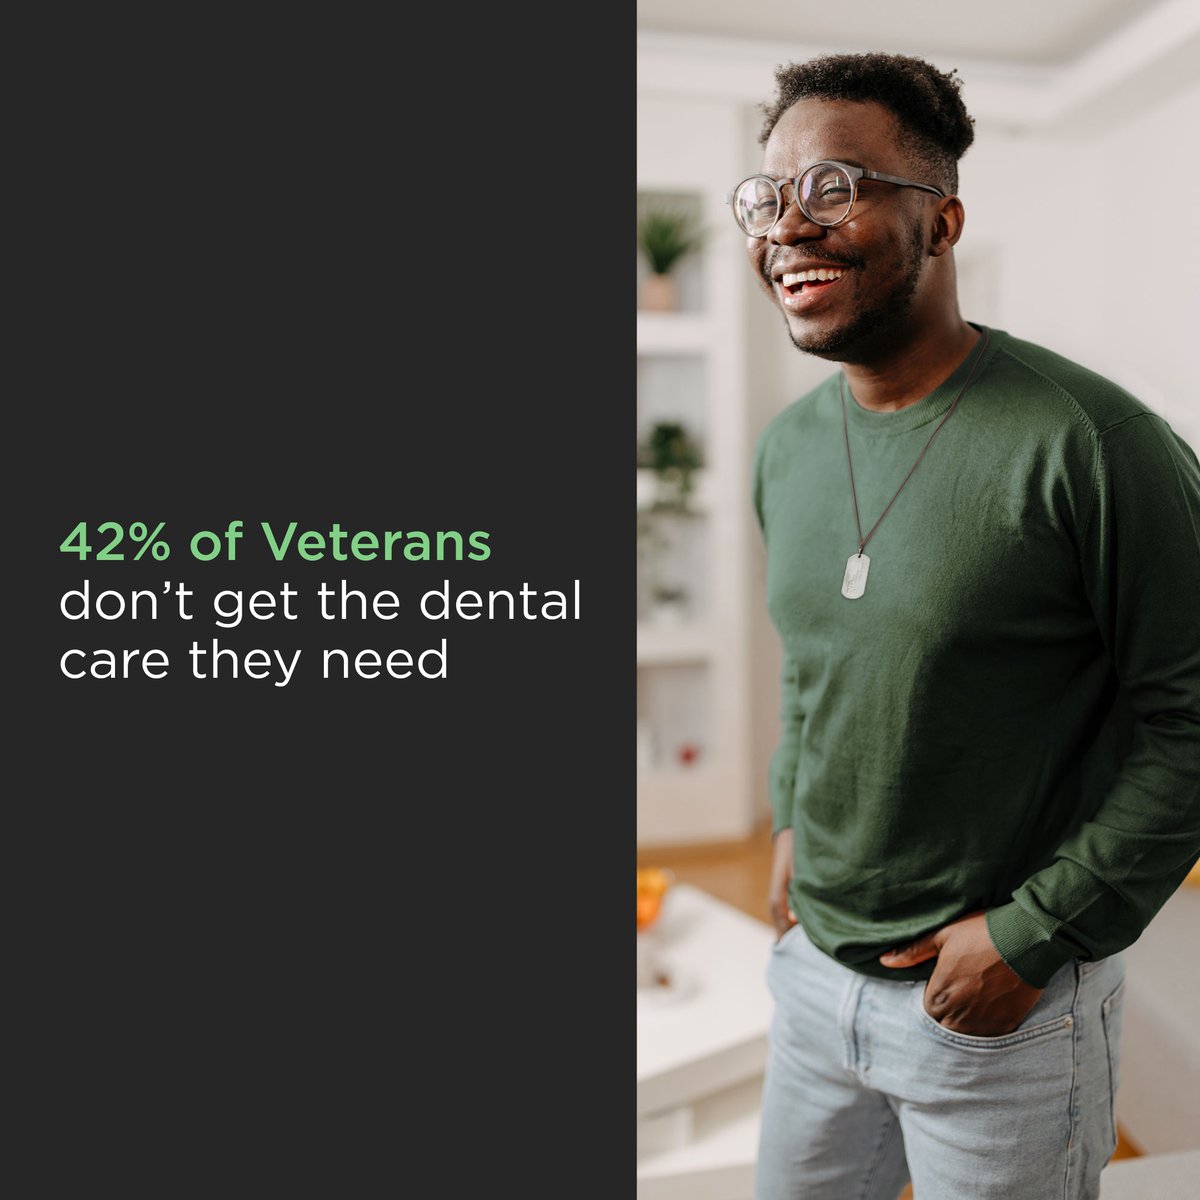 This Military Appreciation Month, as dental providers, let's honor our Veterans by understanding and addressing their specific oral health needs. By offering specialized care and joining networks that focus on Veteran health, we can make a significant impact. Get involved and